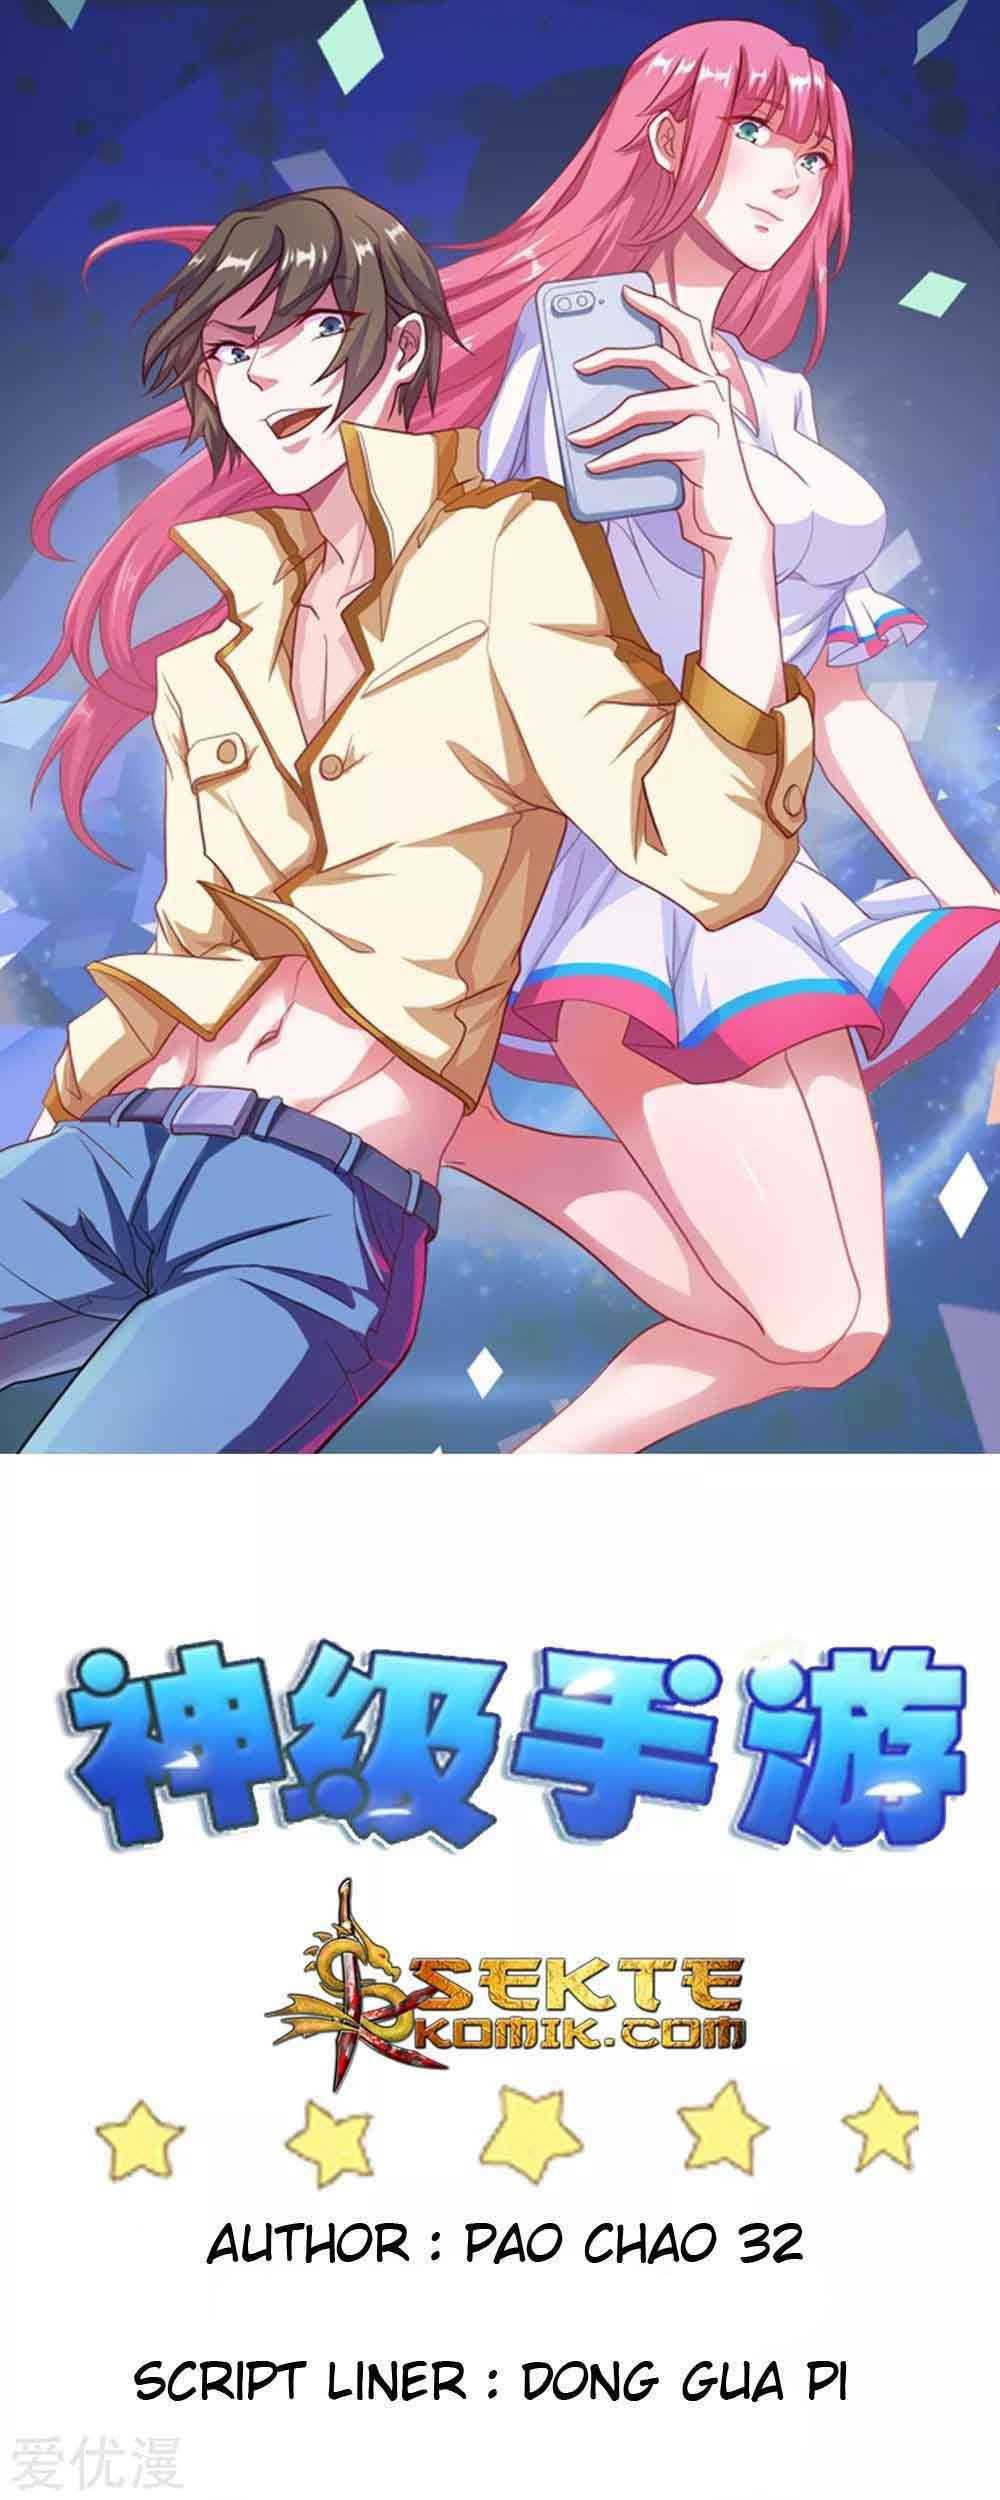 Godly Mobile Game Chapter 22